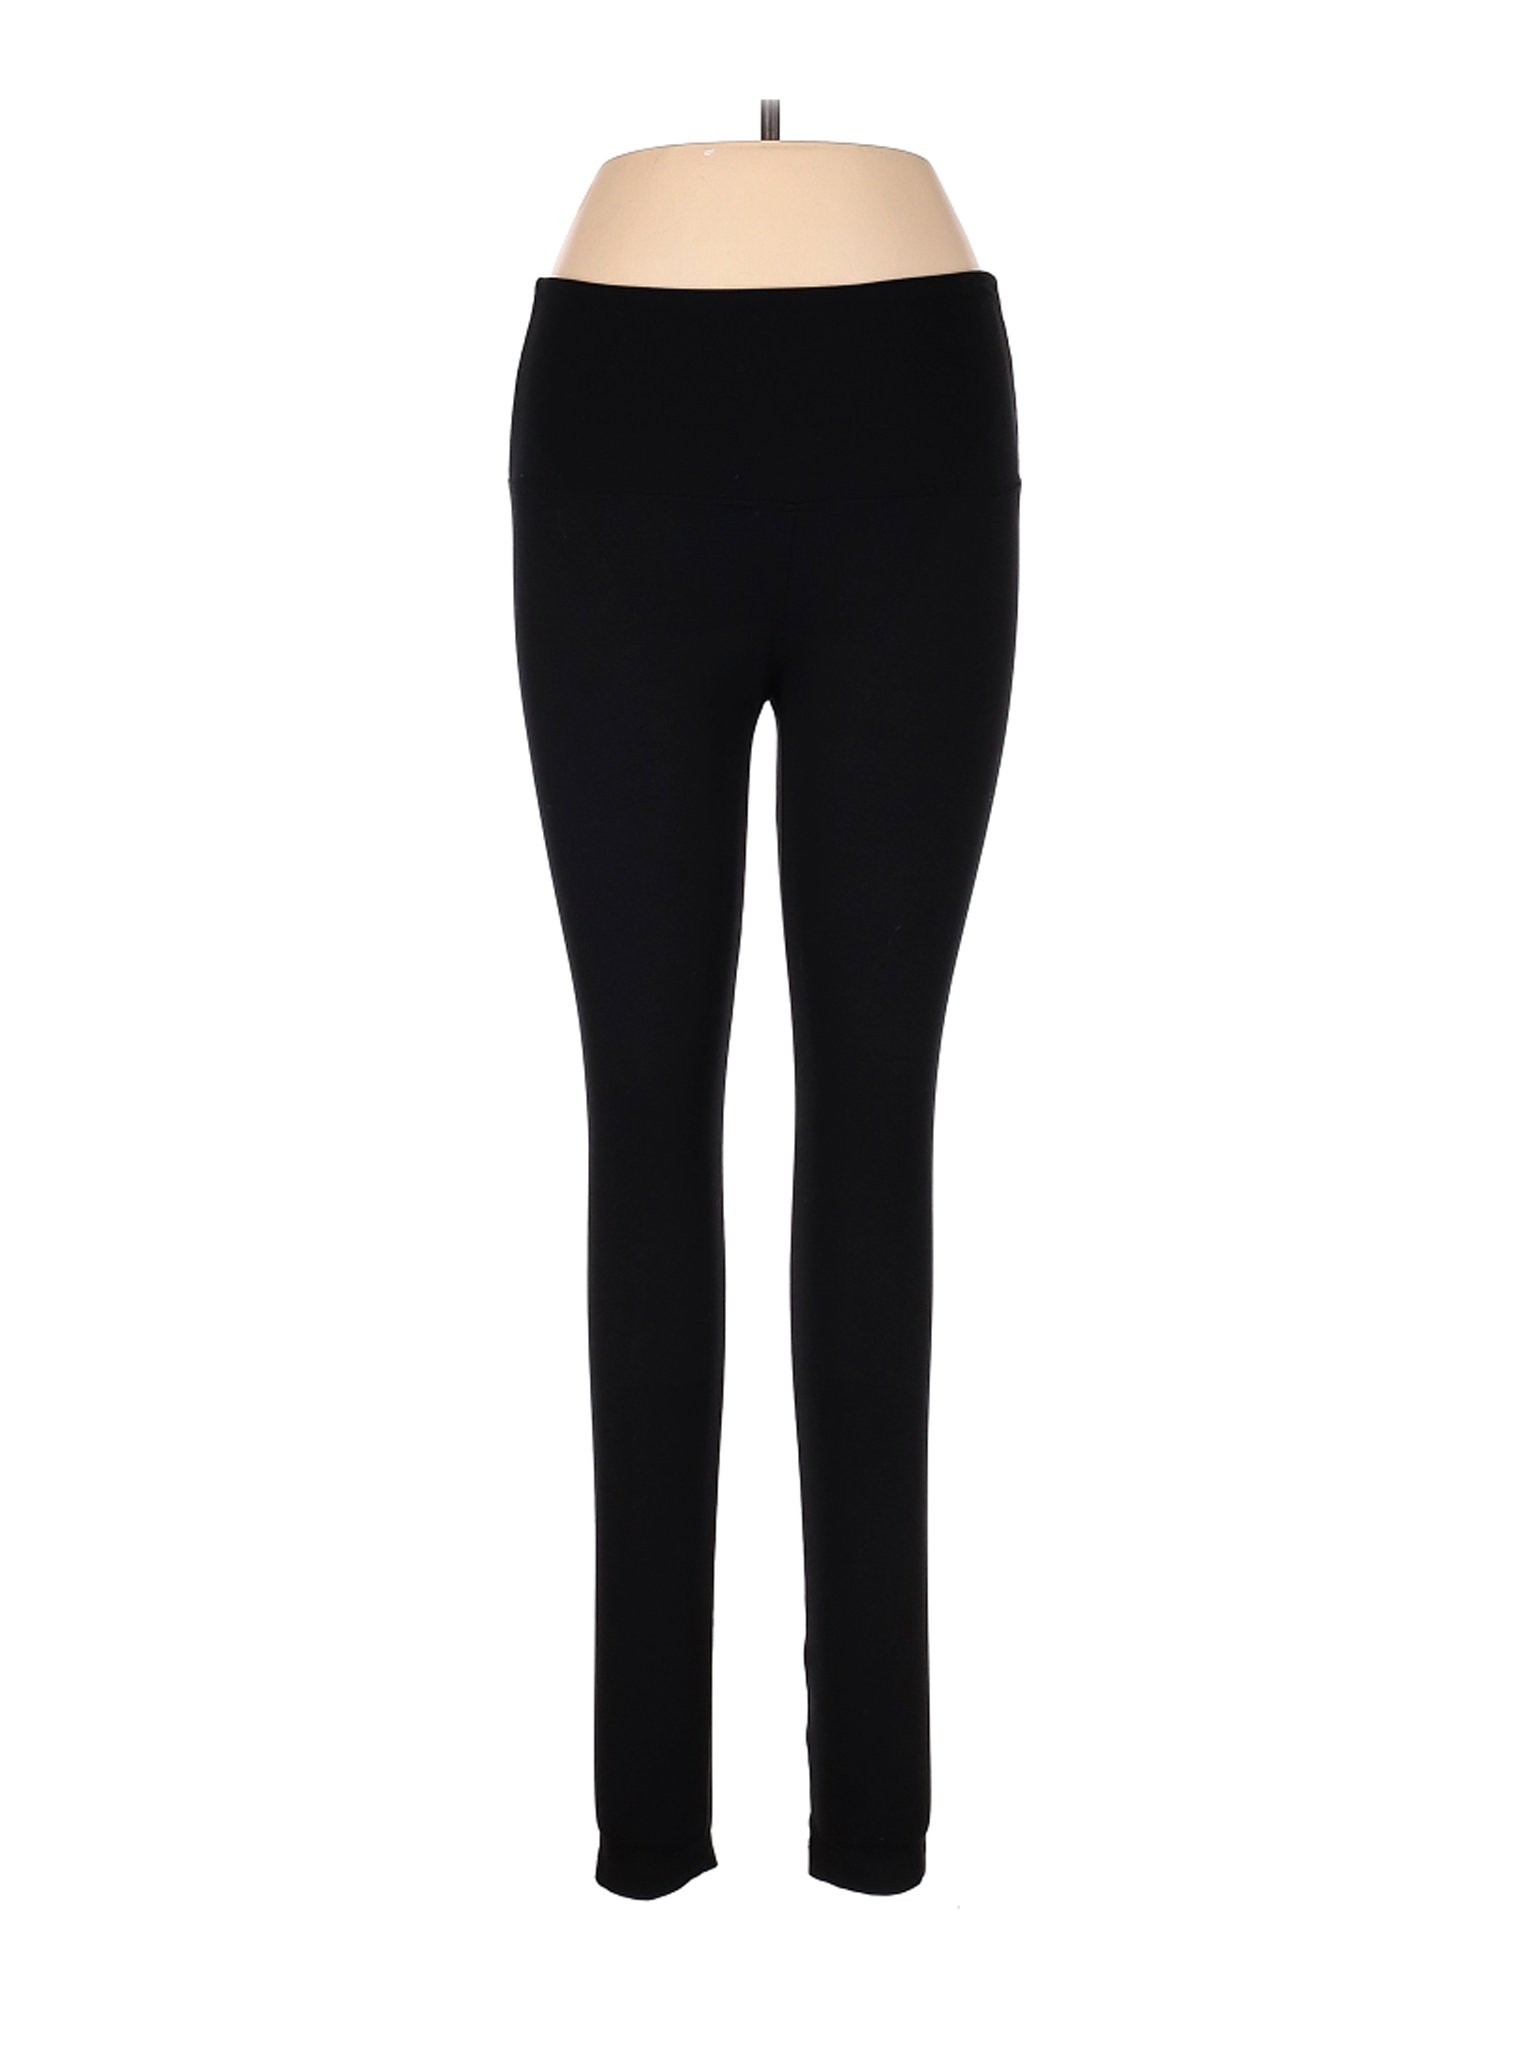 Women's Exercise Leggings With Pockets  International Society of Precision  Agriculture